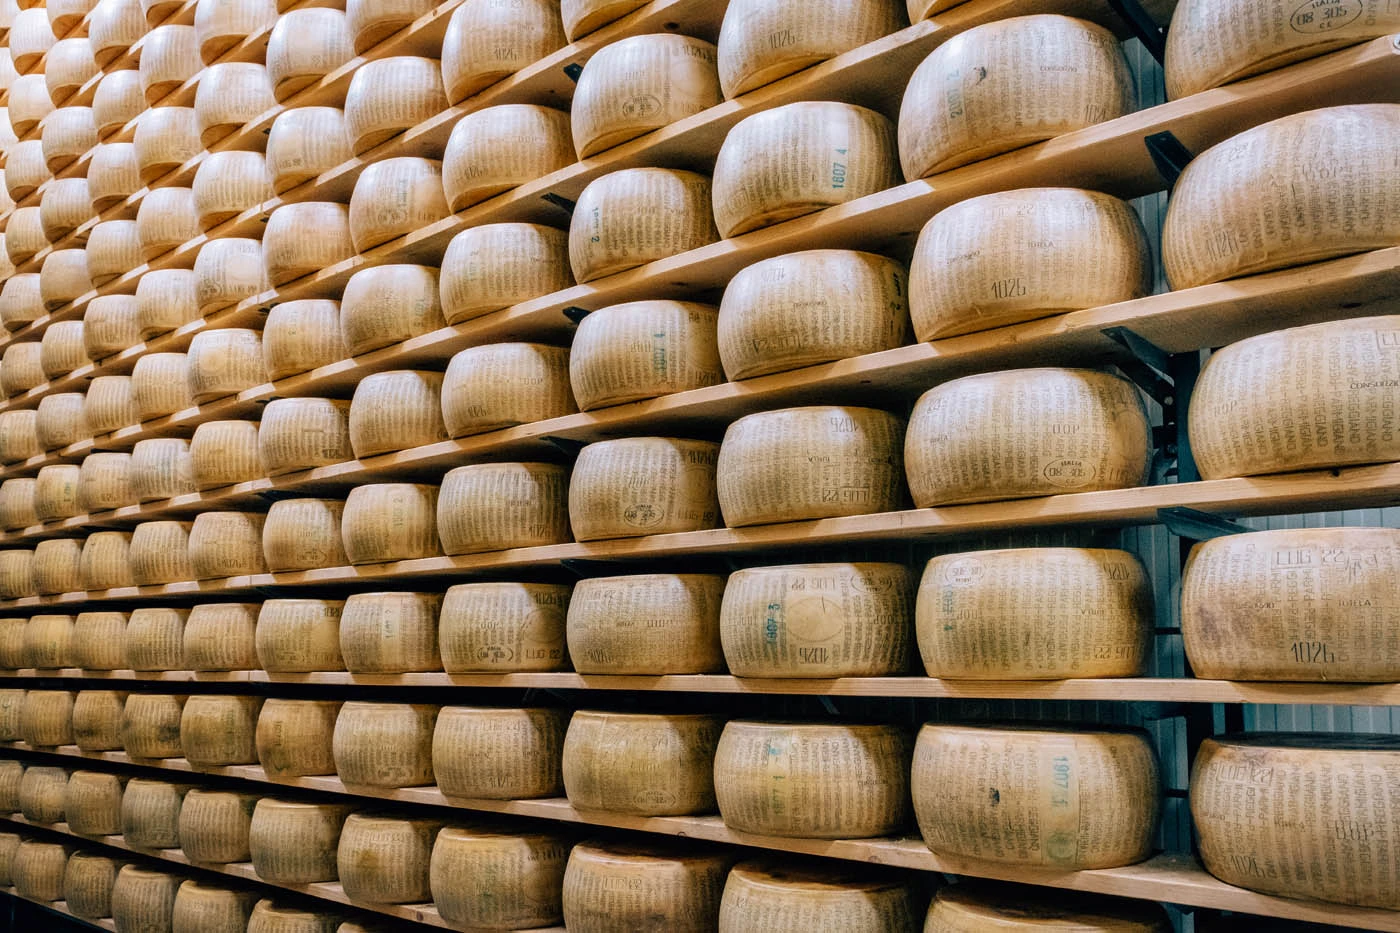 BEST Things to do in Parma Italy - Parmigiano-Reggiano Cheese wheels